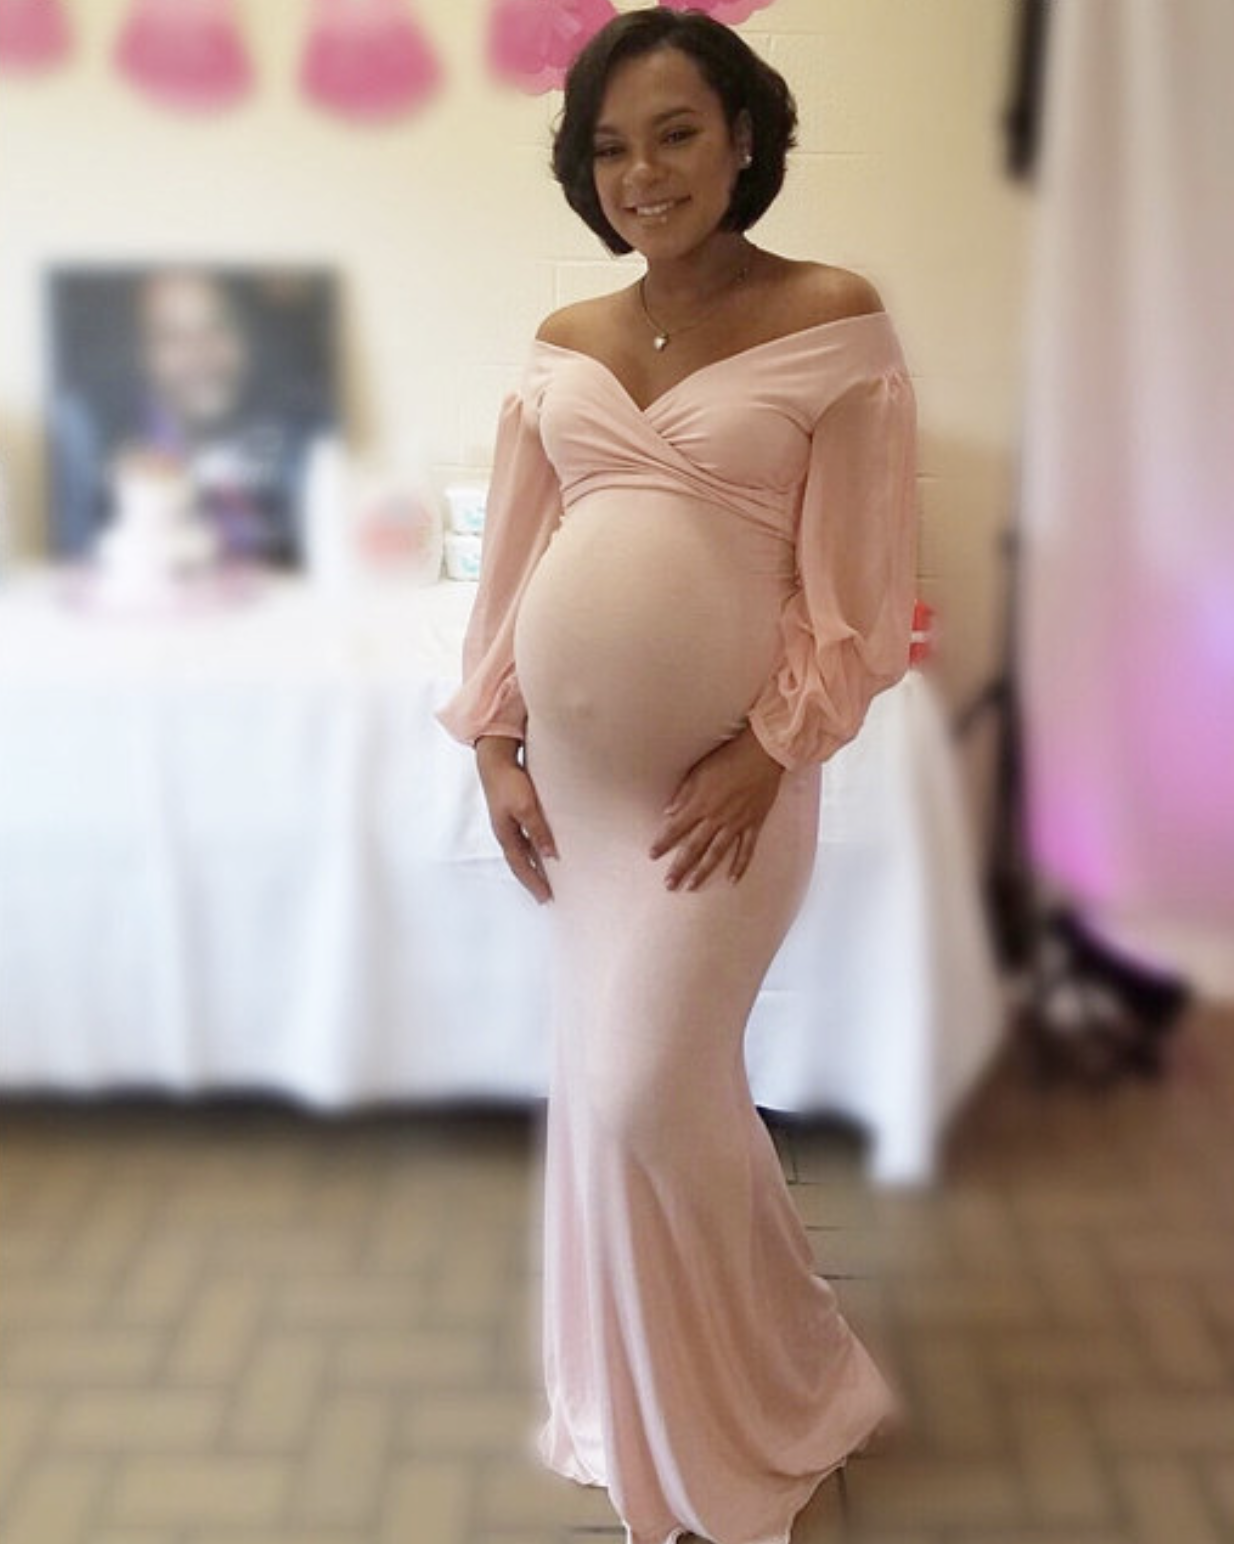 Full Size of Baby Shower:sturdy Stylish Maternity Dresses For Baby Shower Picture Ideas Stylish Maternity Dresses For Baby Shower And Baby Shower Table Ideas With Mesa Baby Shower Plus Baby Shower Door Prizes Together With Baby Shower Seat As Well As Homemade Baby Shower Gifts